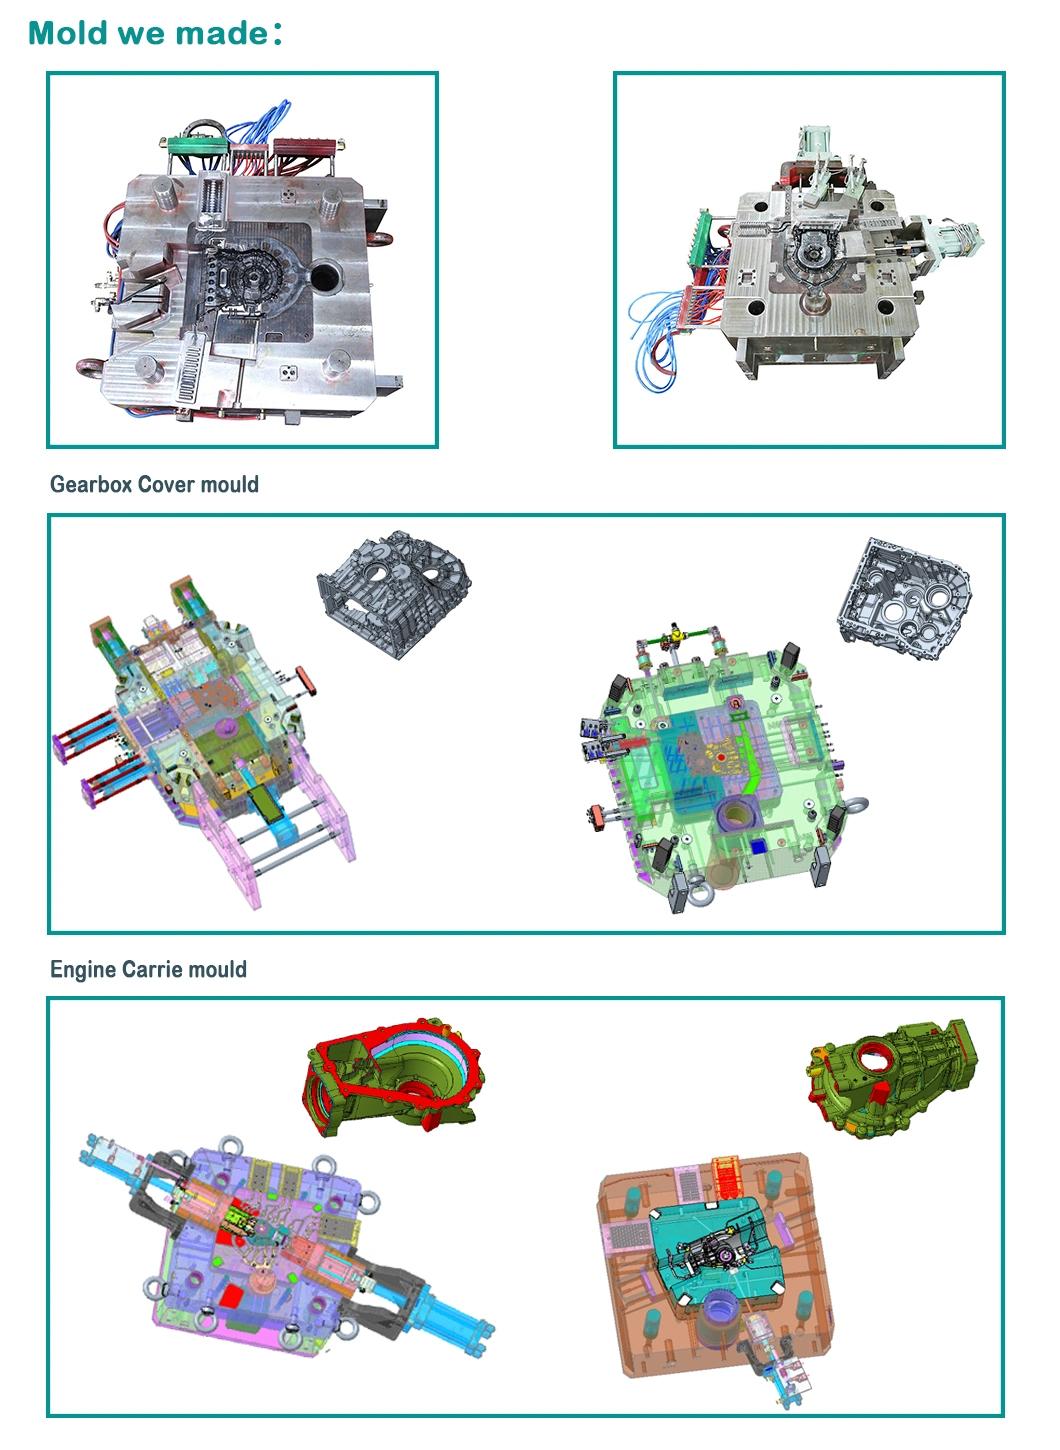 Plastic Injection Mold Hpdc Aluminium/Zinc/Zamak/Magnesium Alloy Casting Die Casting Mold Die Casting Die for Many Industries in China